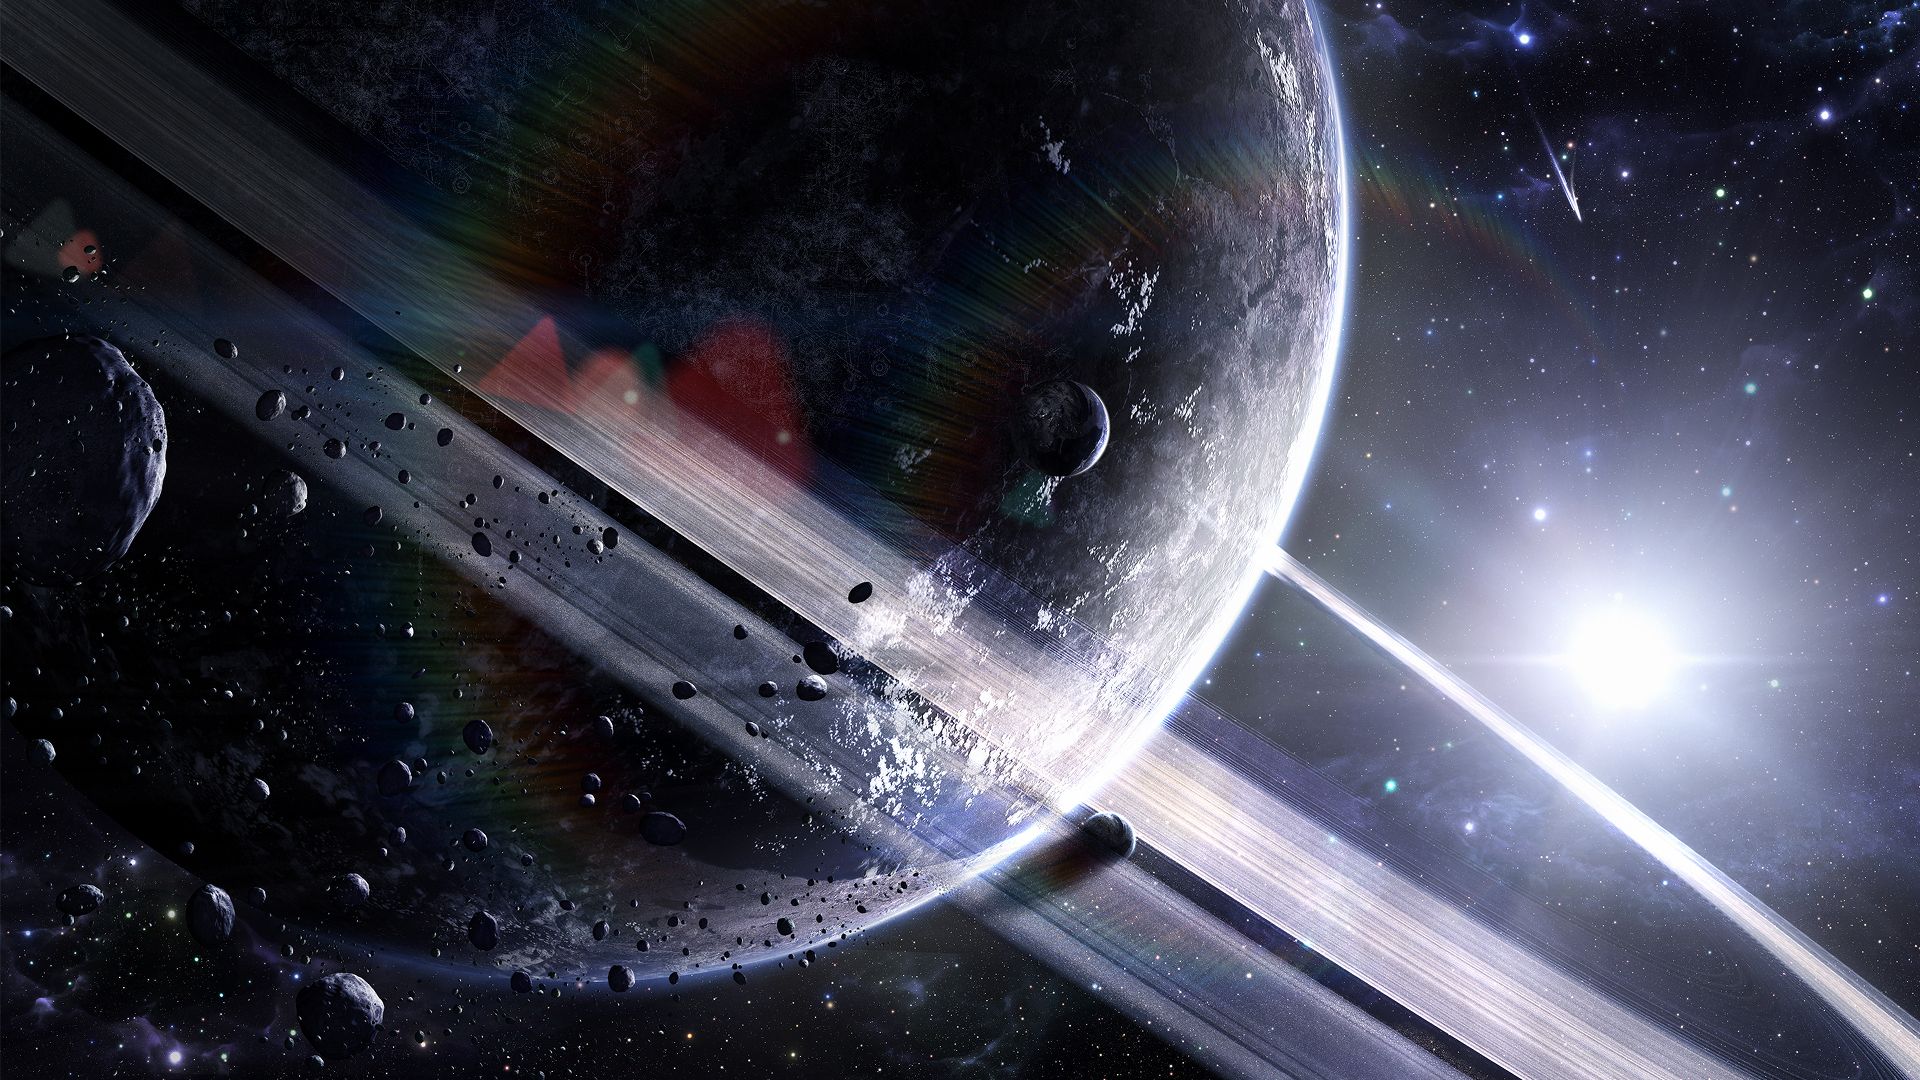 Space Wallpapers 1920x1080 HD Free download 